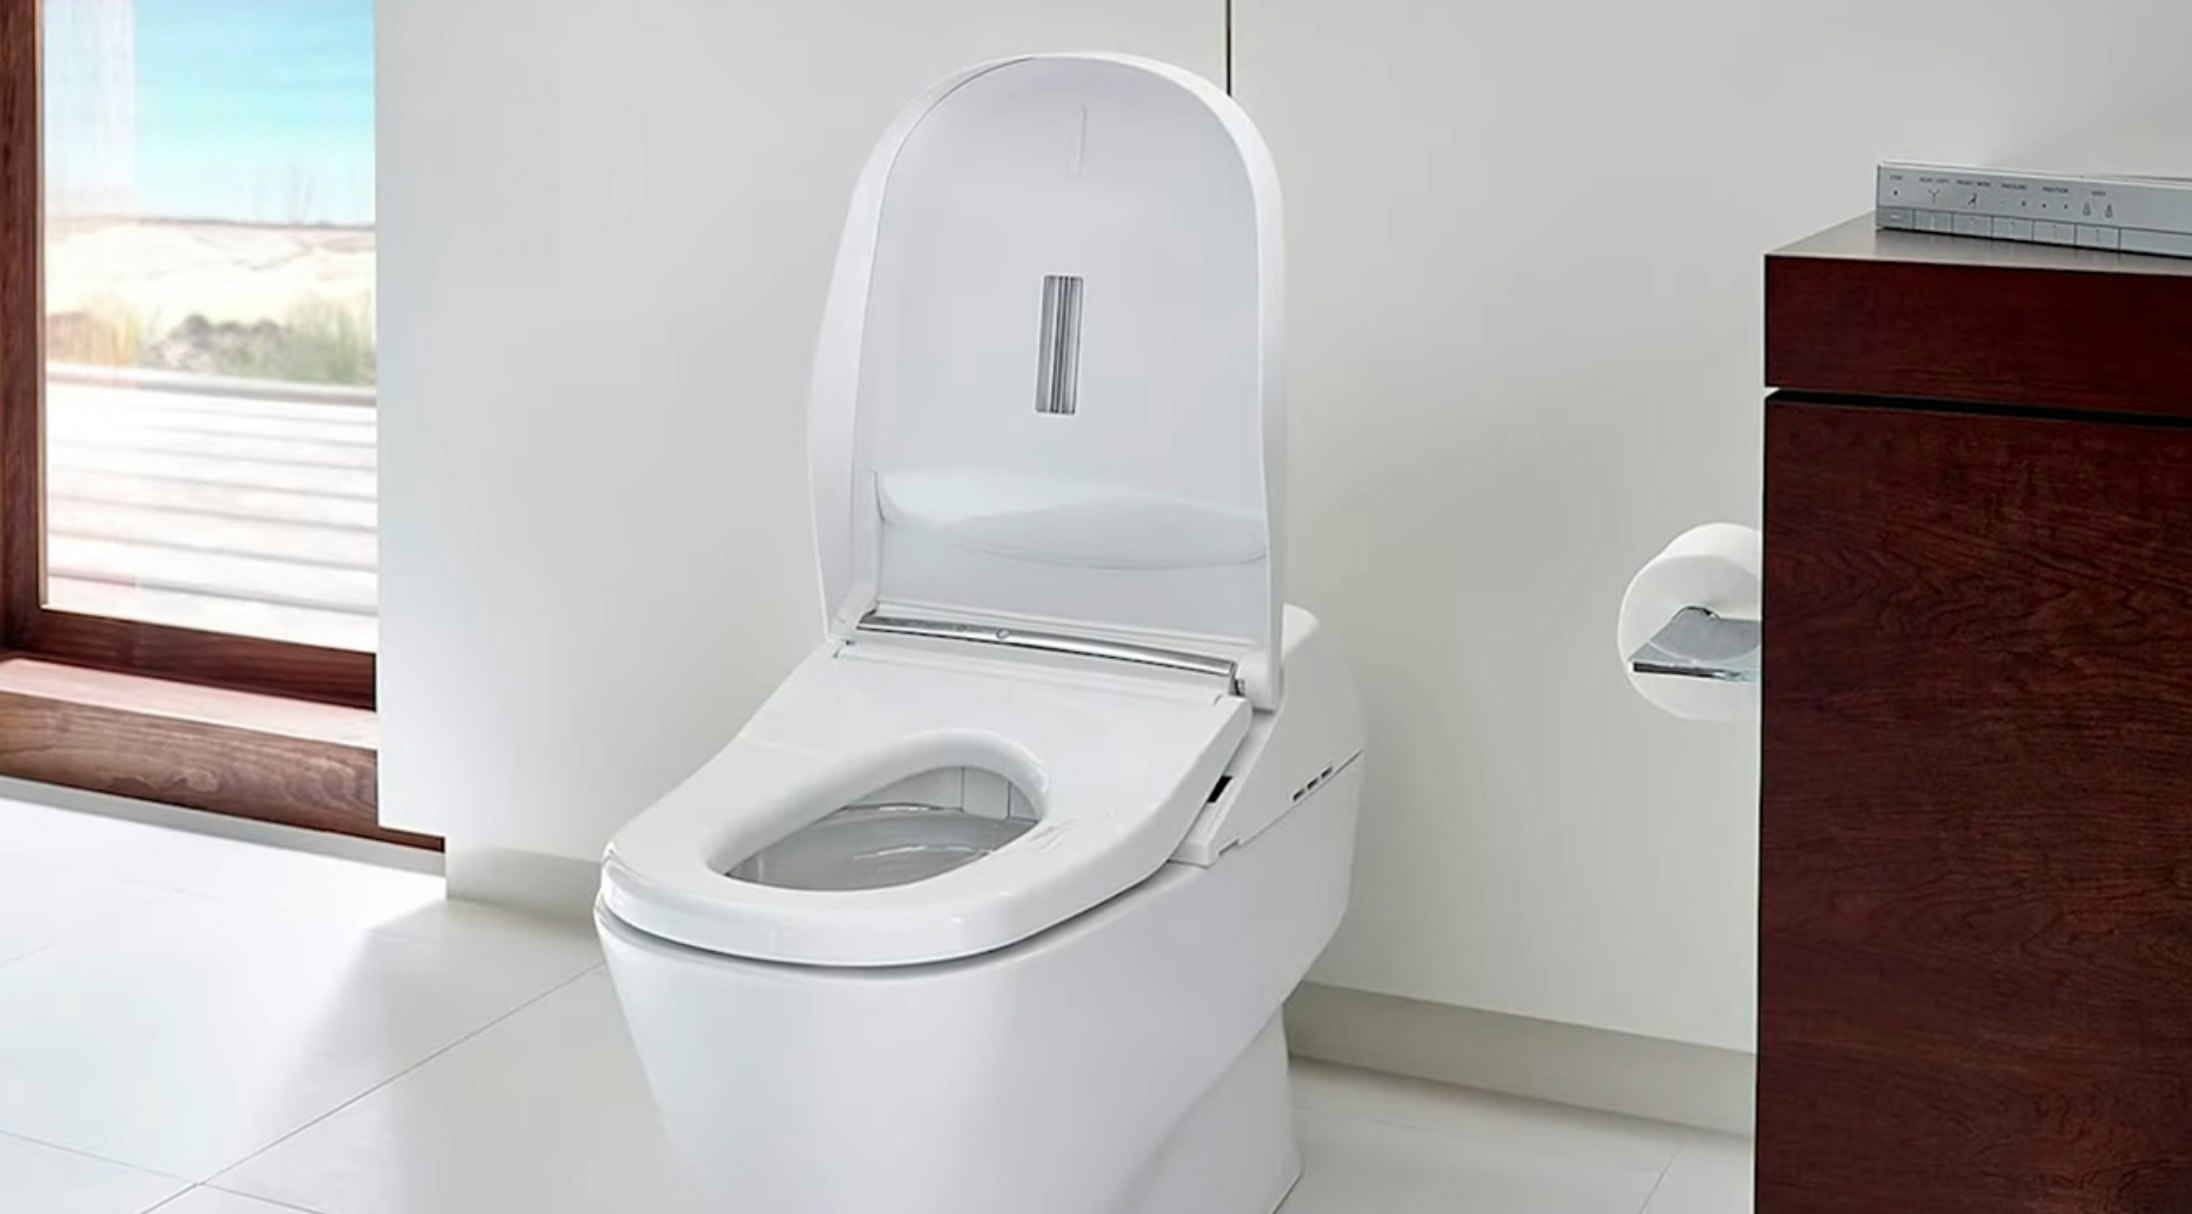 Another model of smart toilet by Toto, the Neoresrt 700H.